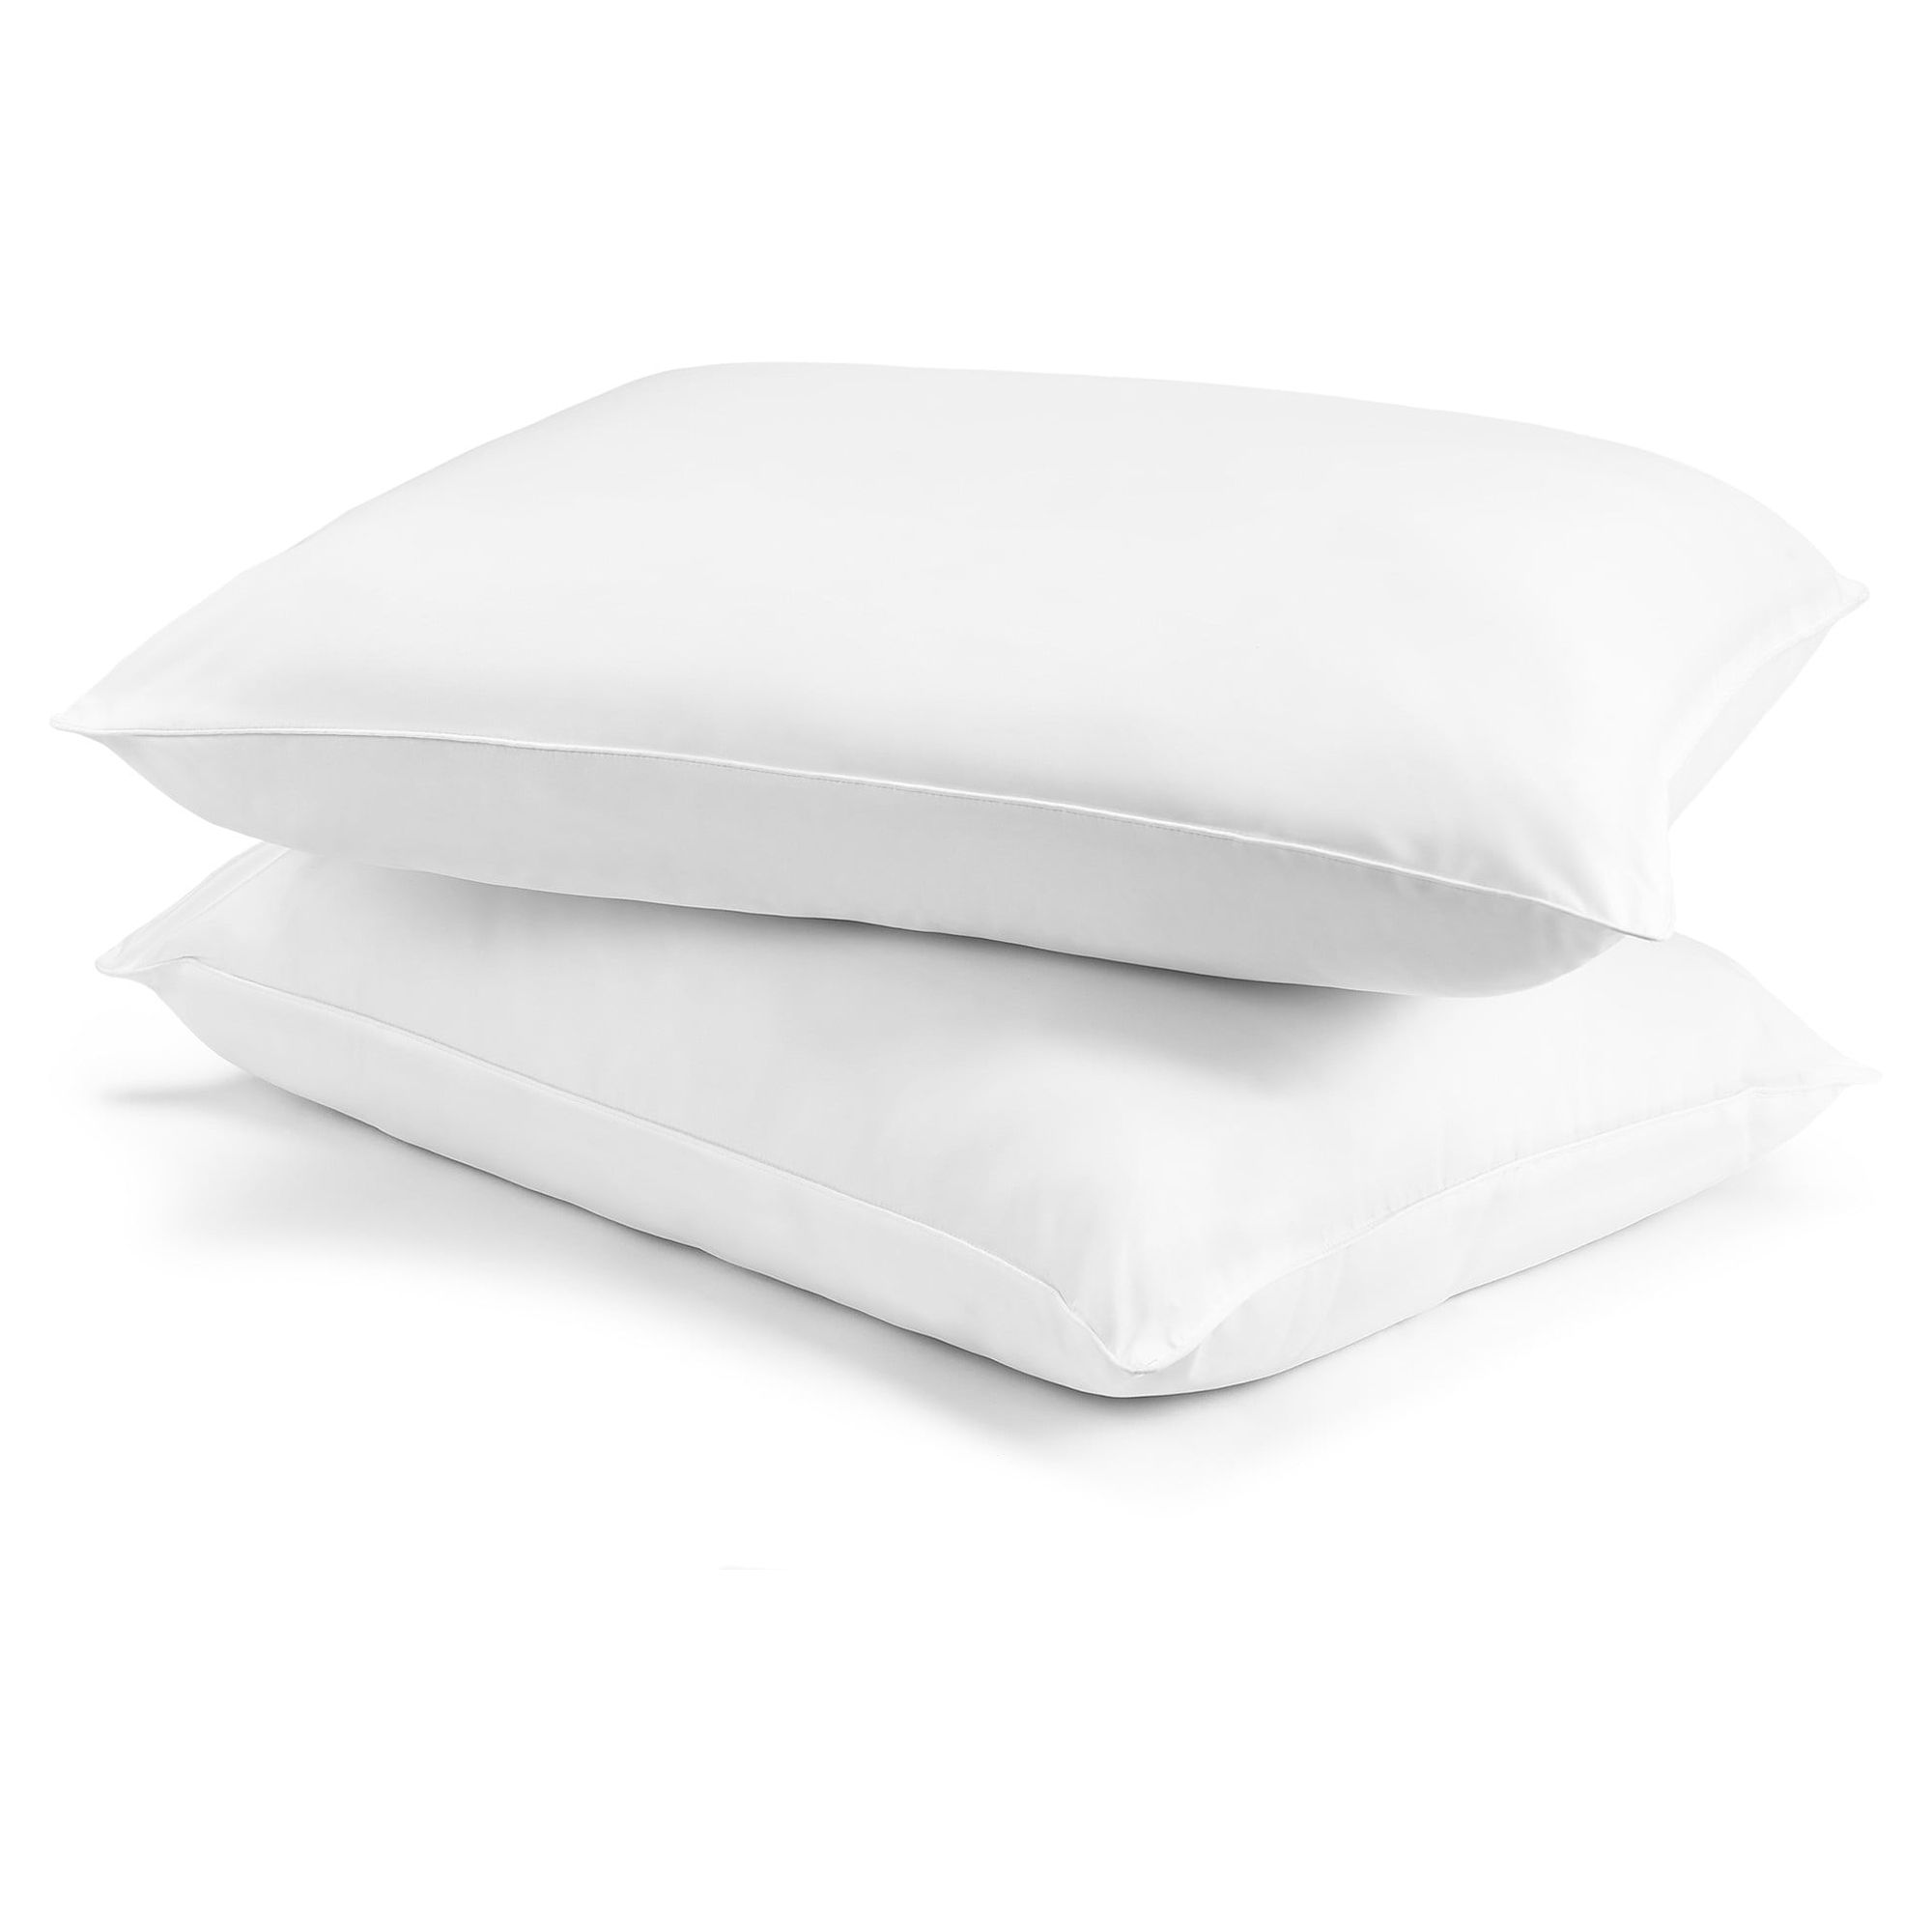 Mainstays Plush Microfiber Bed Pillows, 2 Pack, Standard - image 1 of 7